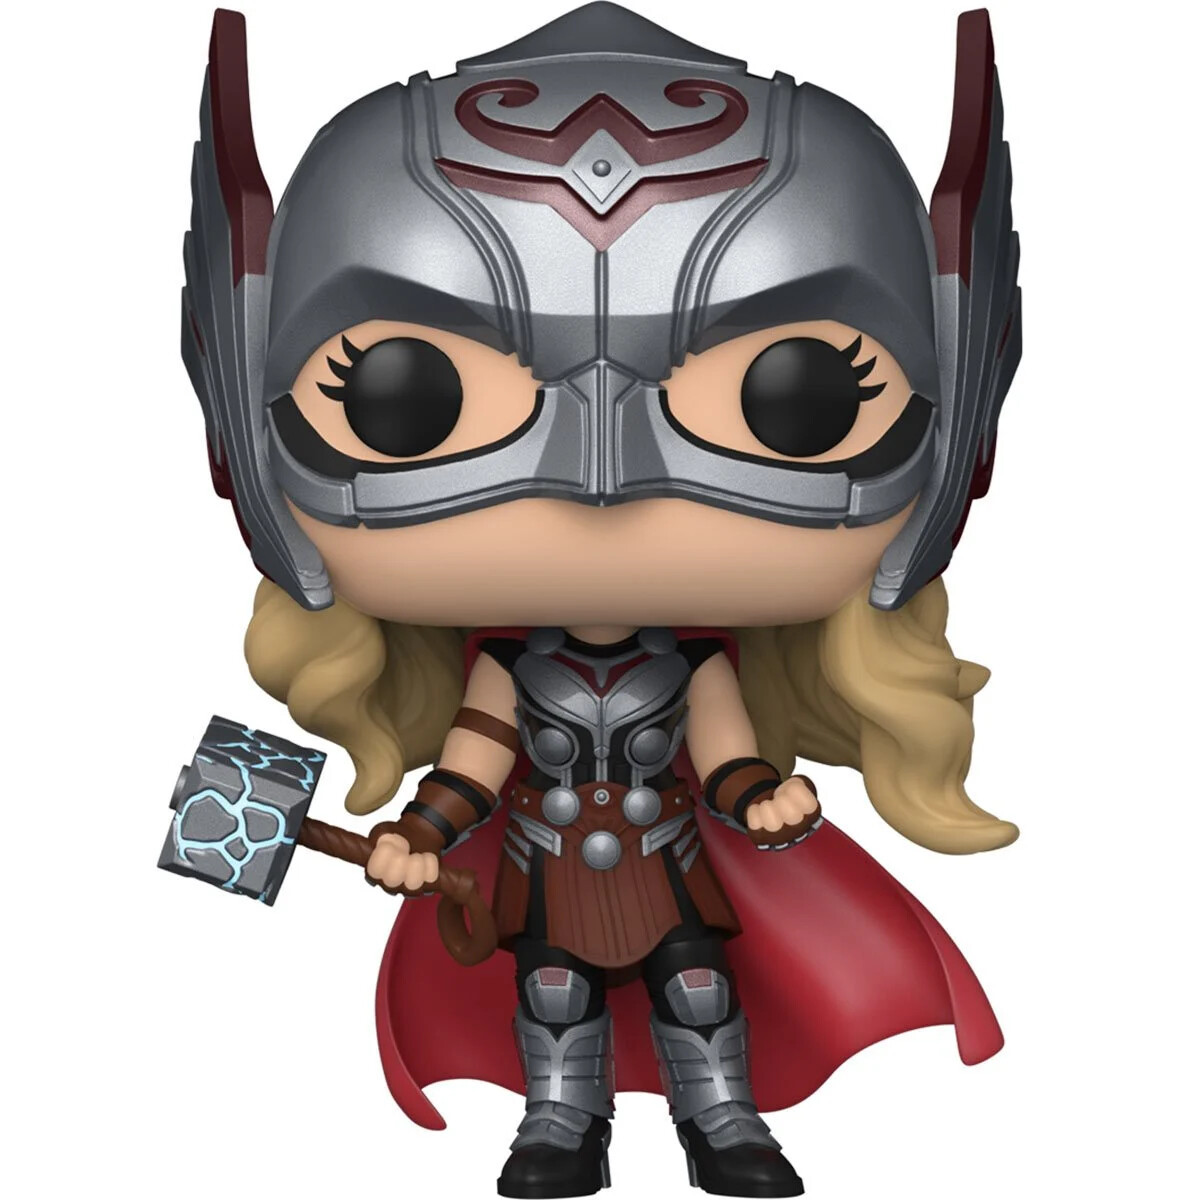 PRE-ORDER Funko Thor: Love and Thunder Mighty Thor Pop! Vinyl Figure - 2nd Batch